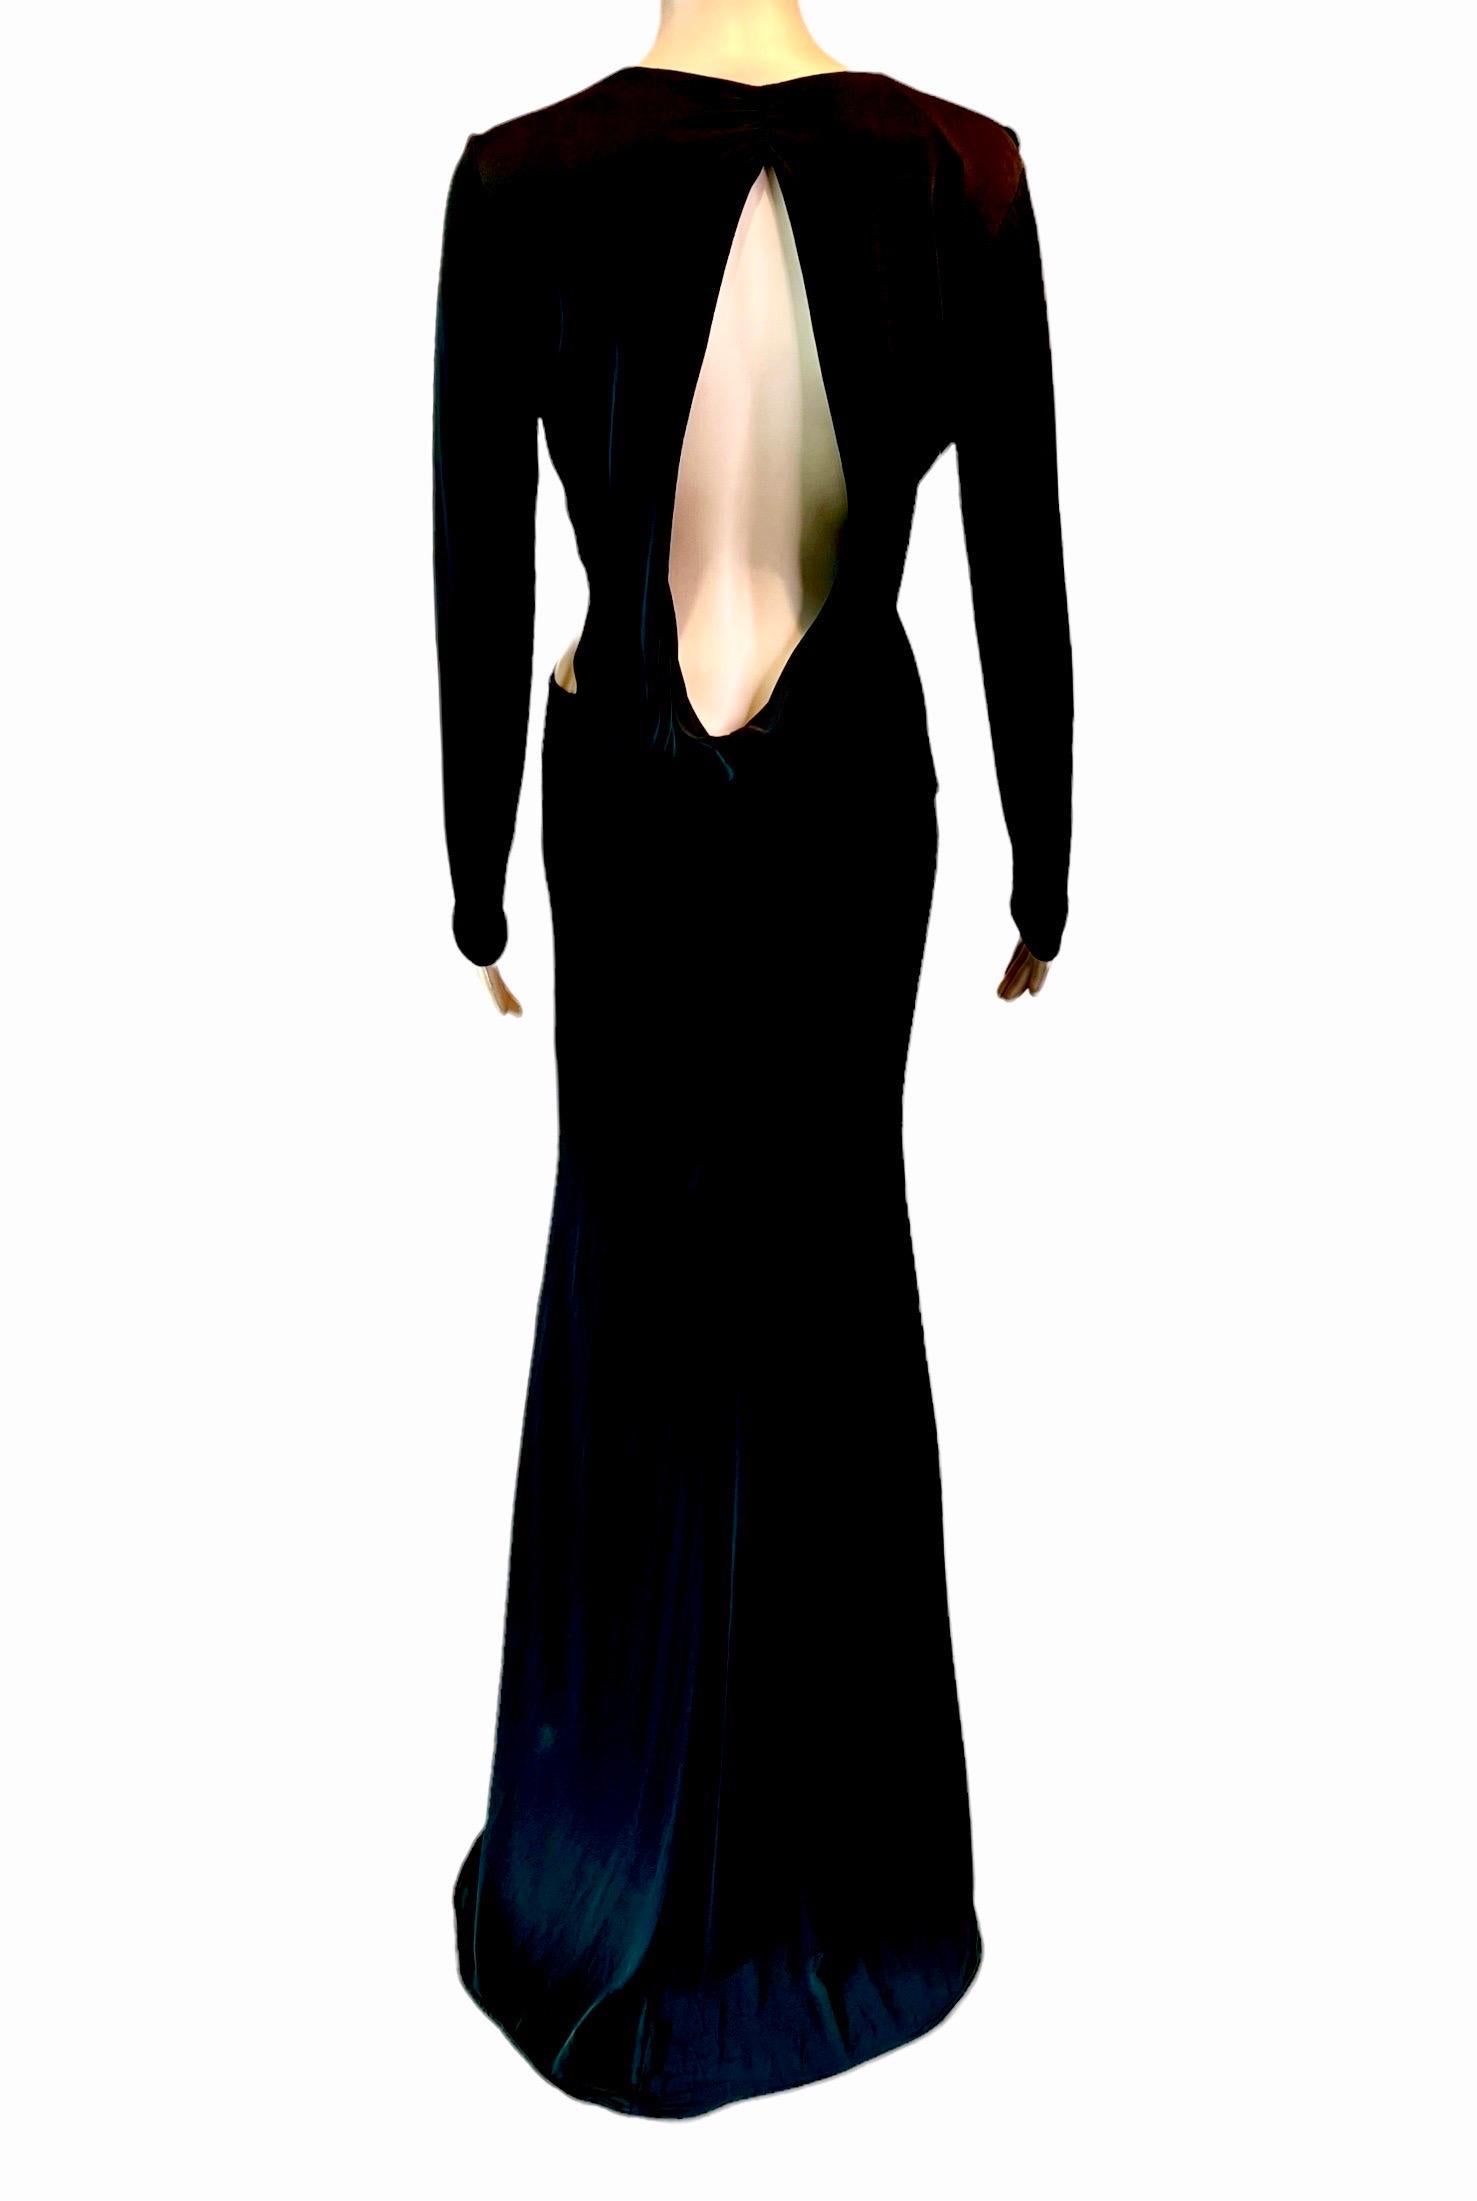 Women's Tom Ford for Gucci F/W 2004 Embellished Plunging Cutout Black Evening Dress Gown